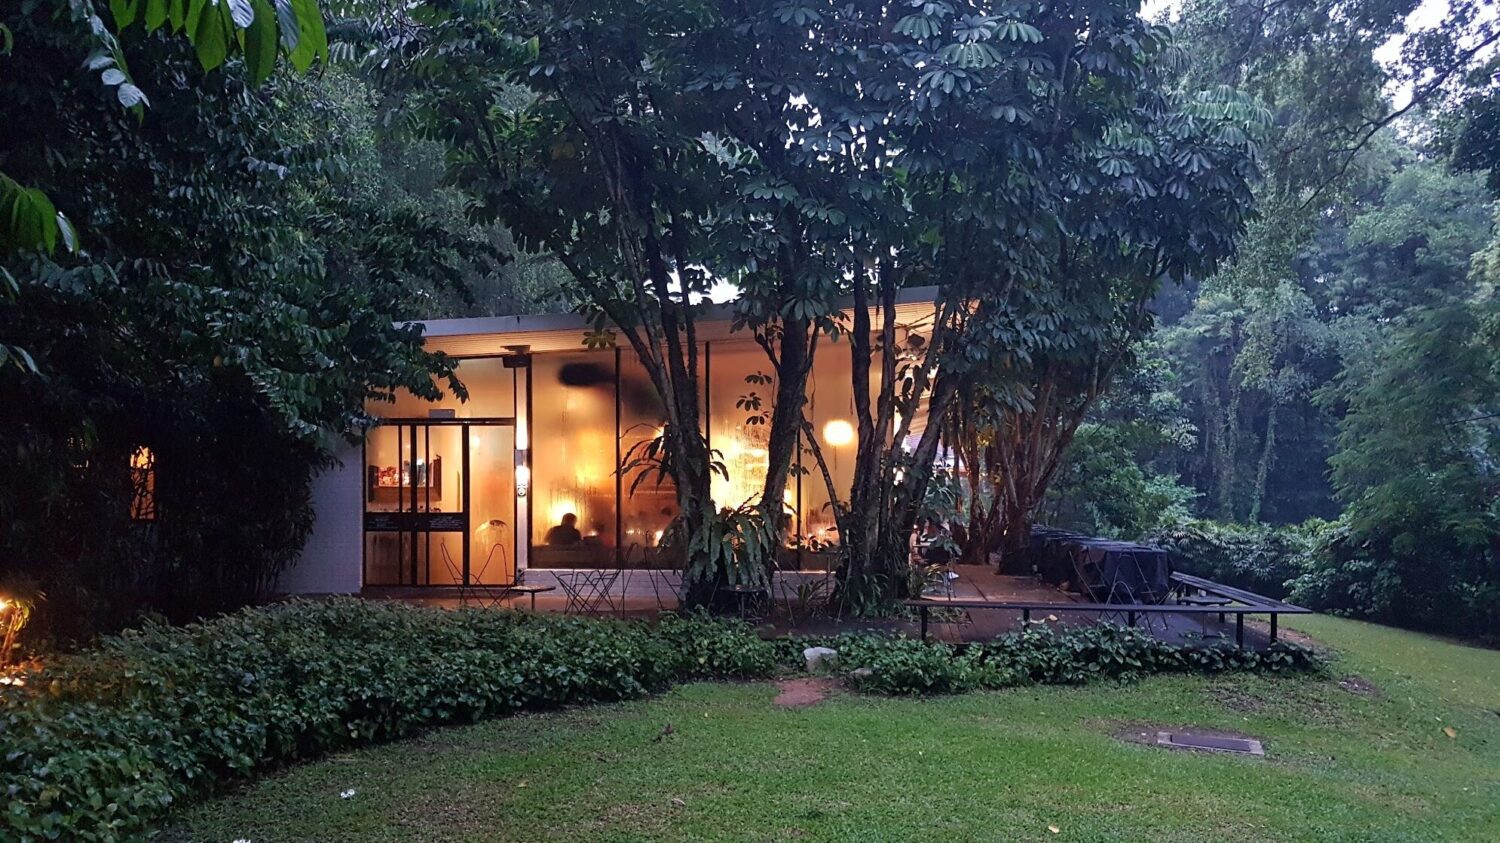 The cozy PS Café at Harding Road, Dempsey Hill Singapore